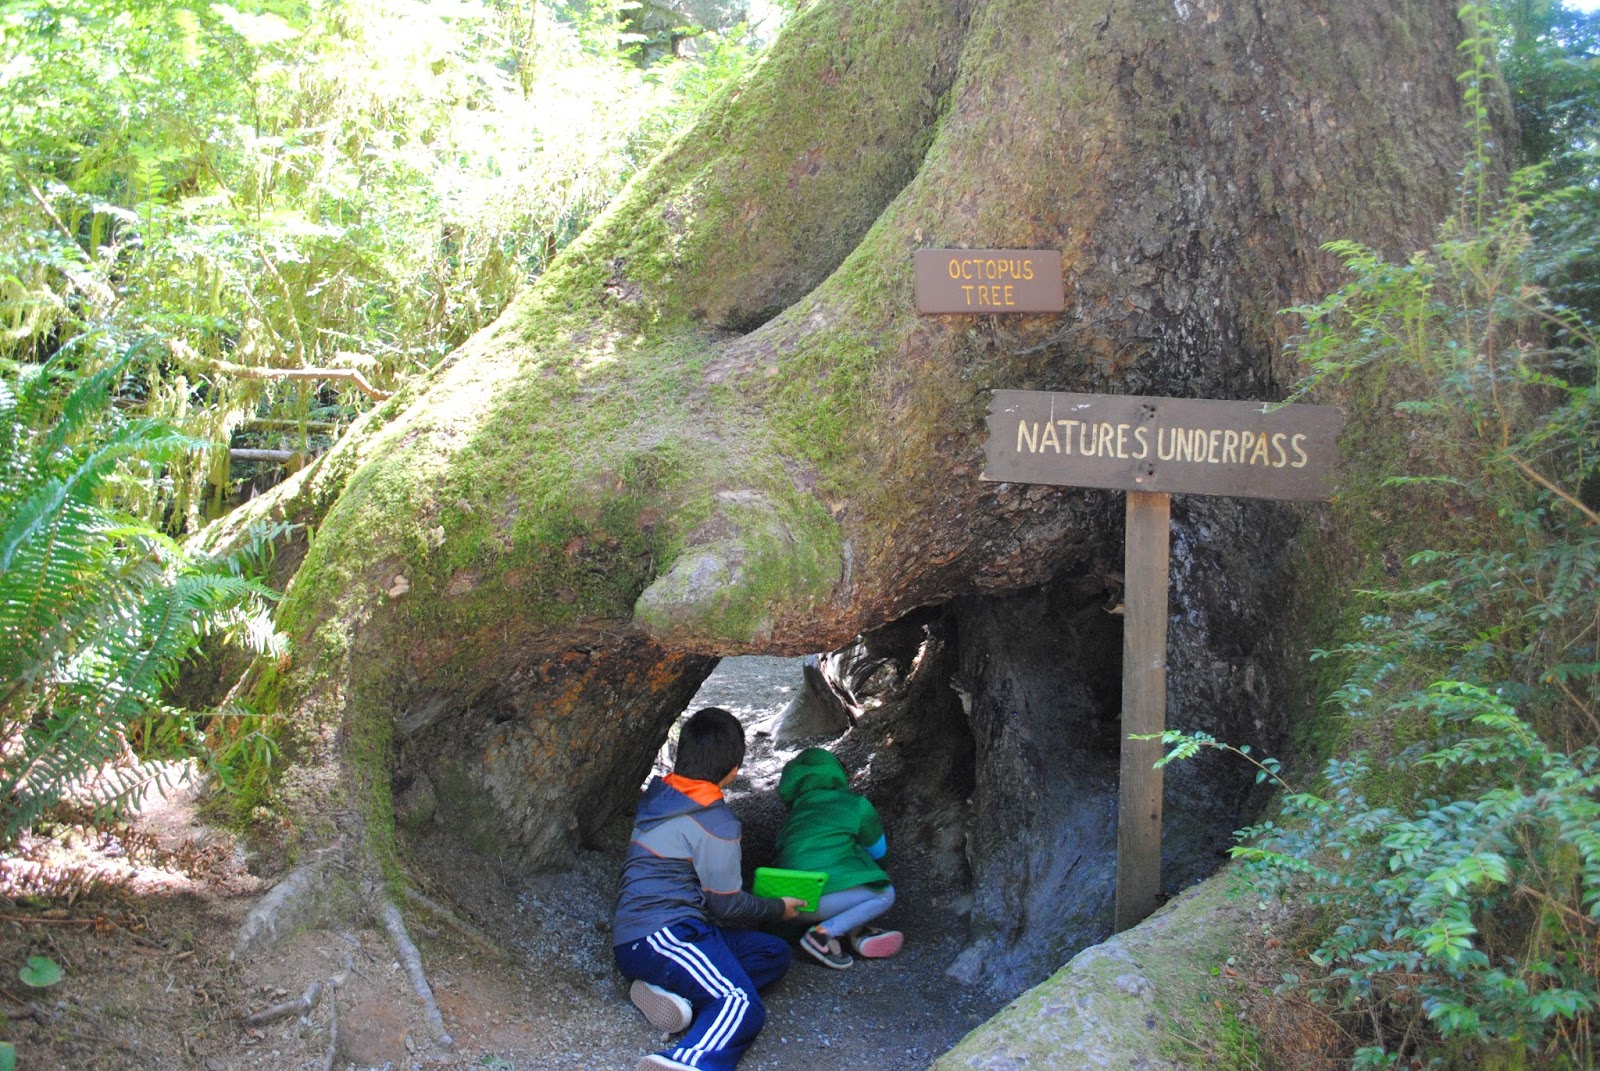 TREES OF MYSTERY - What to do in Southern Oregon - Things to do - Norhtern California - Camping - Day TRip - Kid-Friendly - Beaches